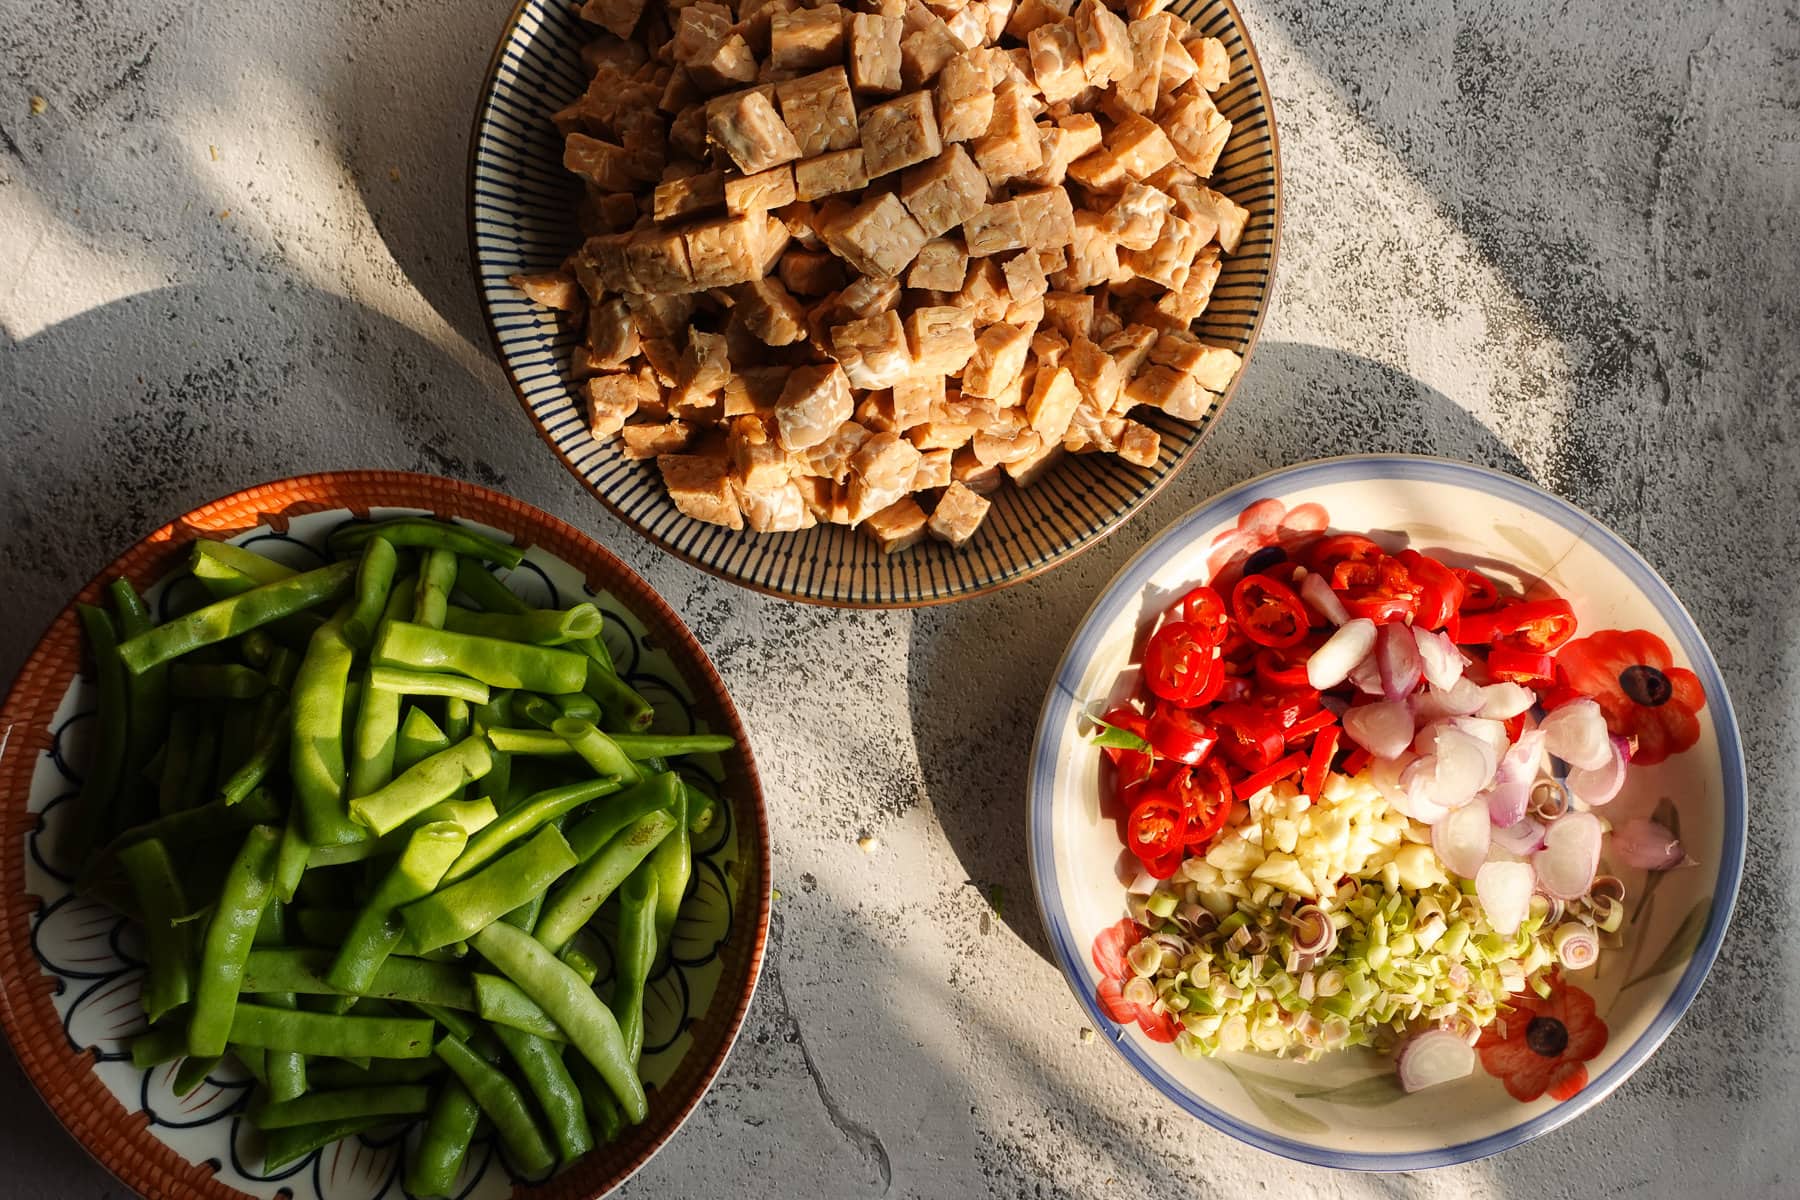 Cut the tempeh, green beans and slice your aromatics